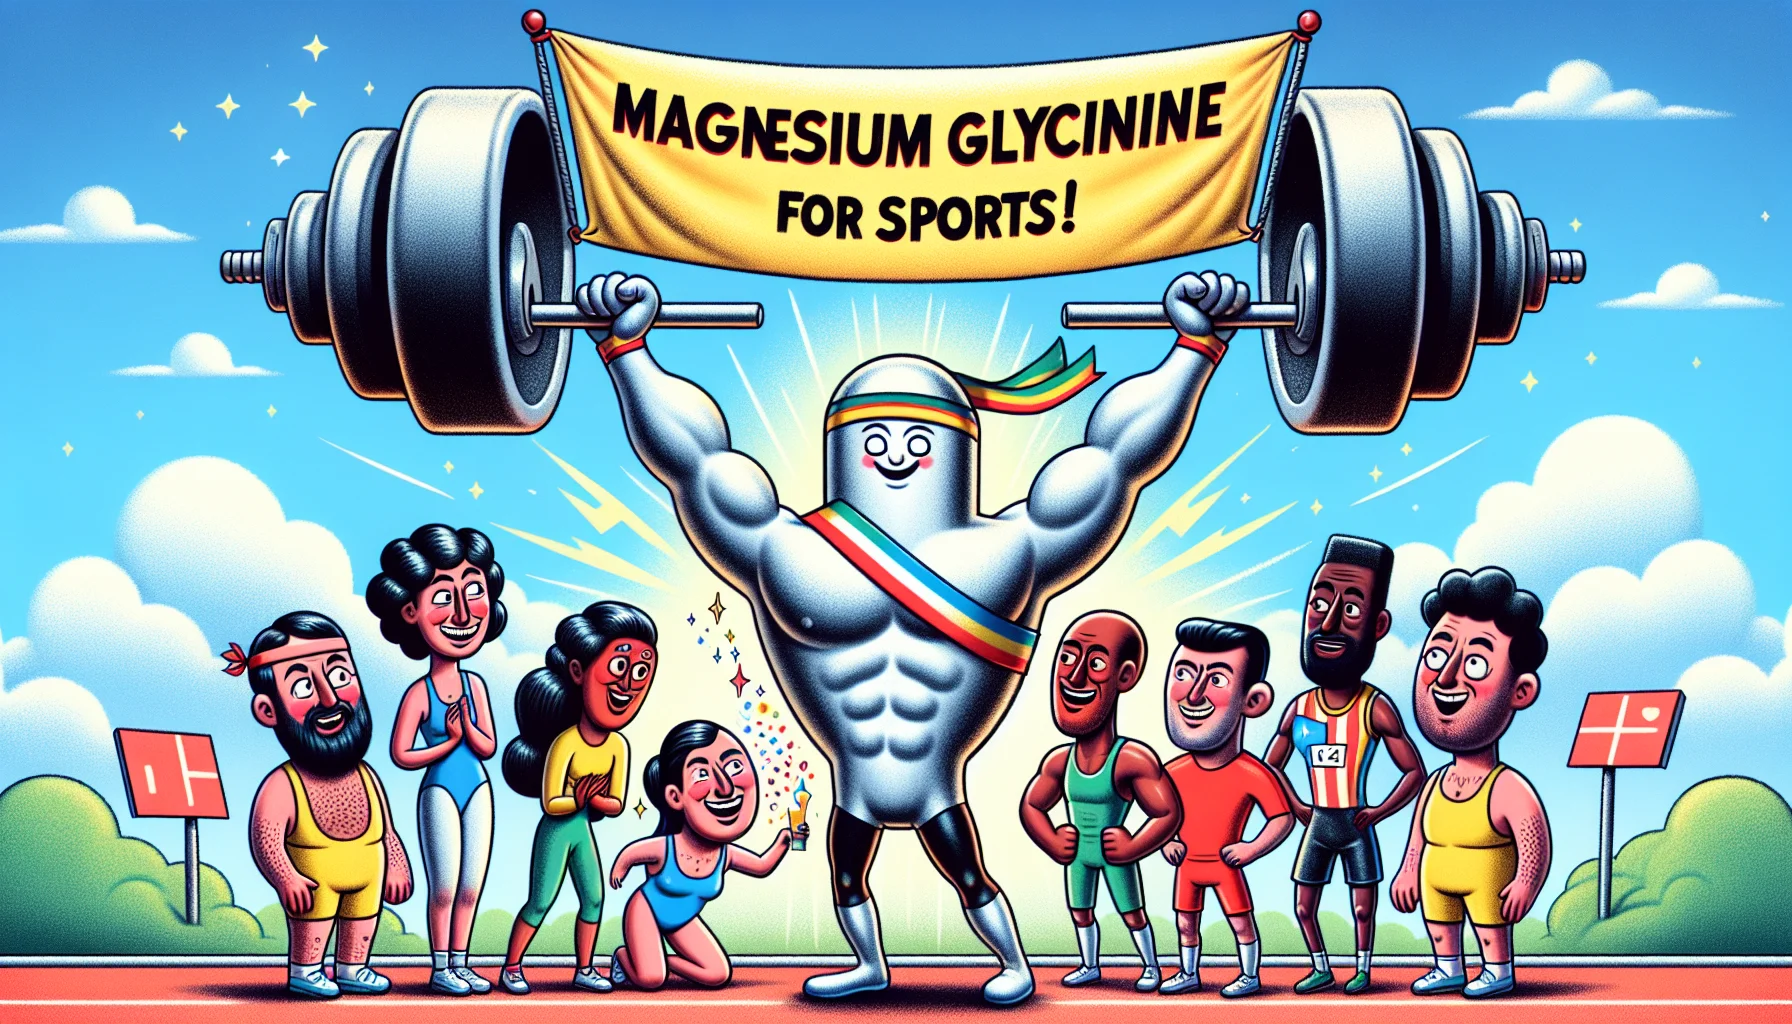 Create an imaginative yet realistic scene where a comically exaggerated dumbbell, designed with an endearing human face and athletic attire, is brandishing a banner that proudly declares 'Magnesium Glycinate for Sports!'. Surrounding it, a diverse assembly of people consisting of a Middle-Eastern female marathon runner, a Caucasian male swimmer, a black female gymnast, and a Hispanic male soccer player. Each are drawn in colorful, cartoonish optimism, their expressions reflecting admiration and curiosity towards the charismatic dumbbell.